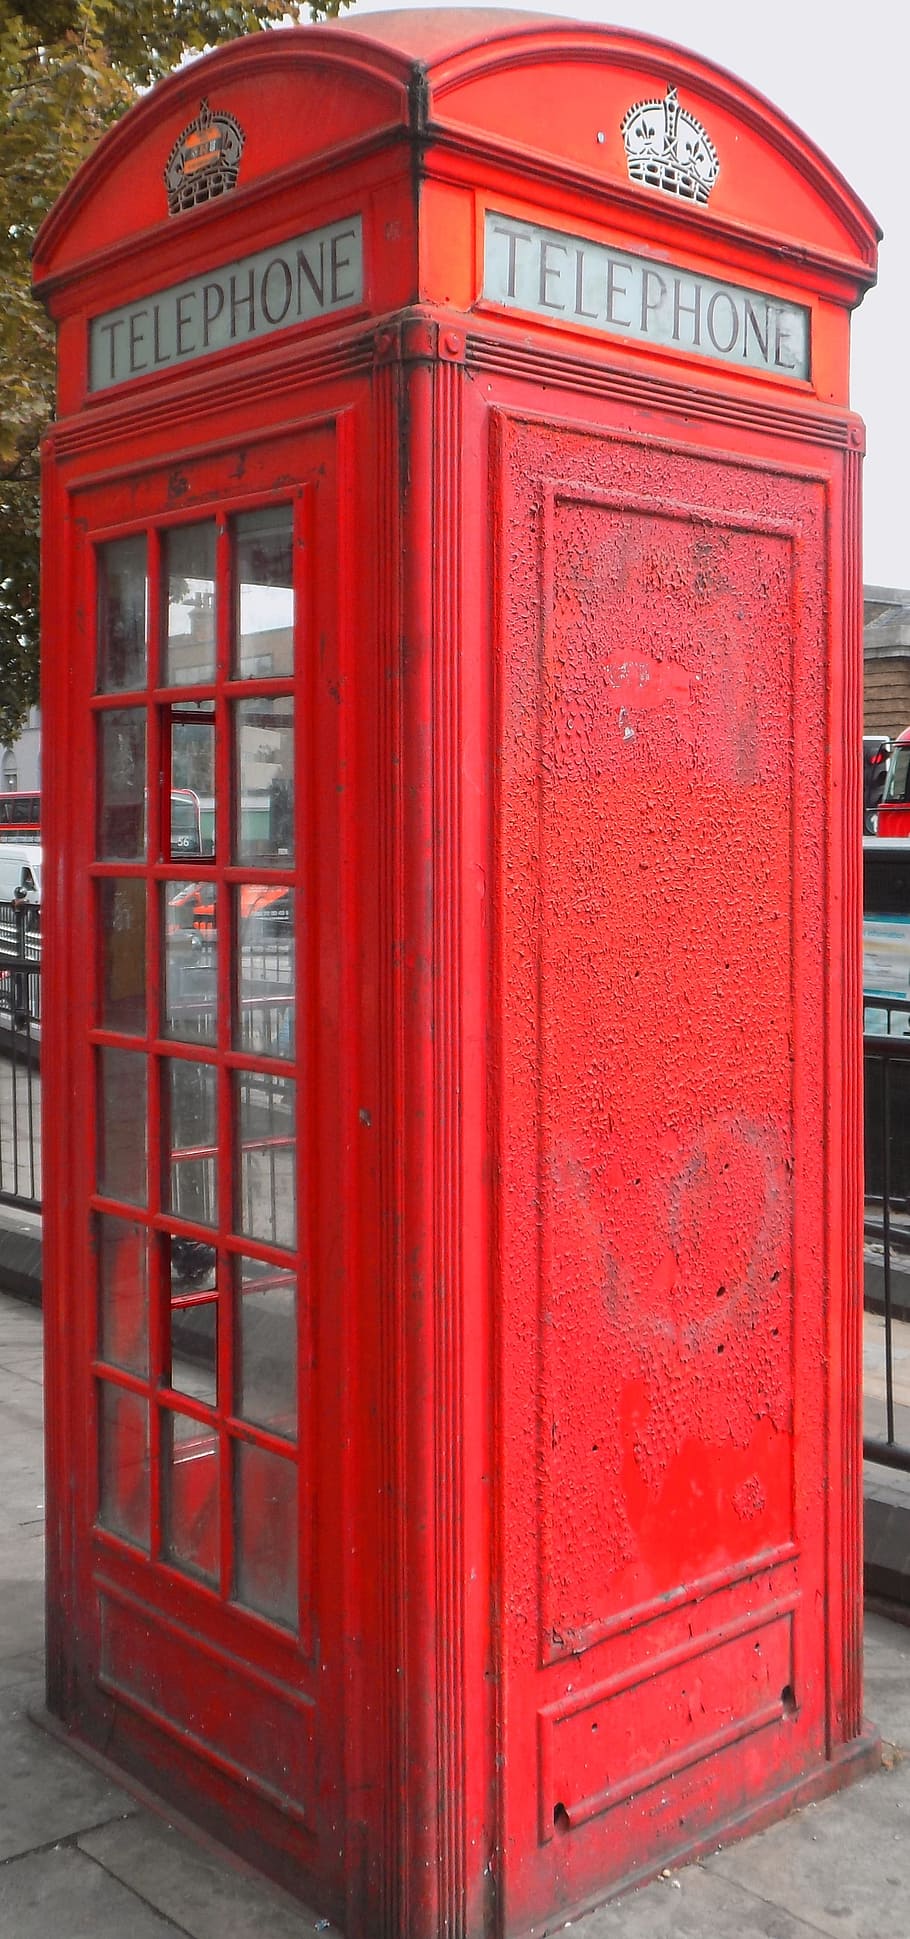 phone booth, london, phone, telephone, communication, telephone booth, red, architecture, built structure, text